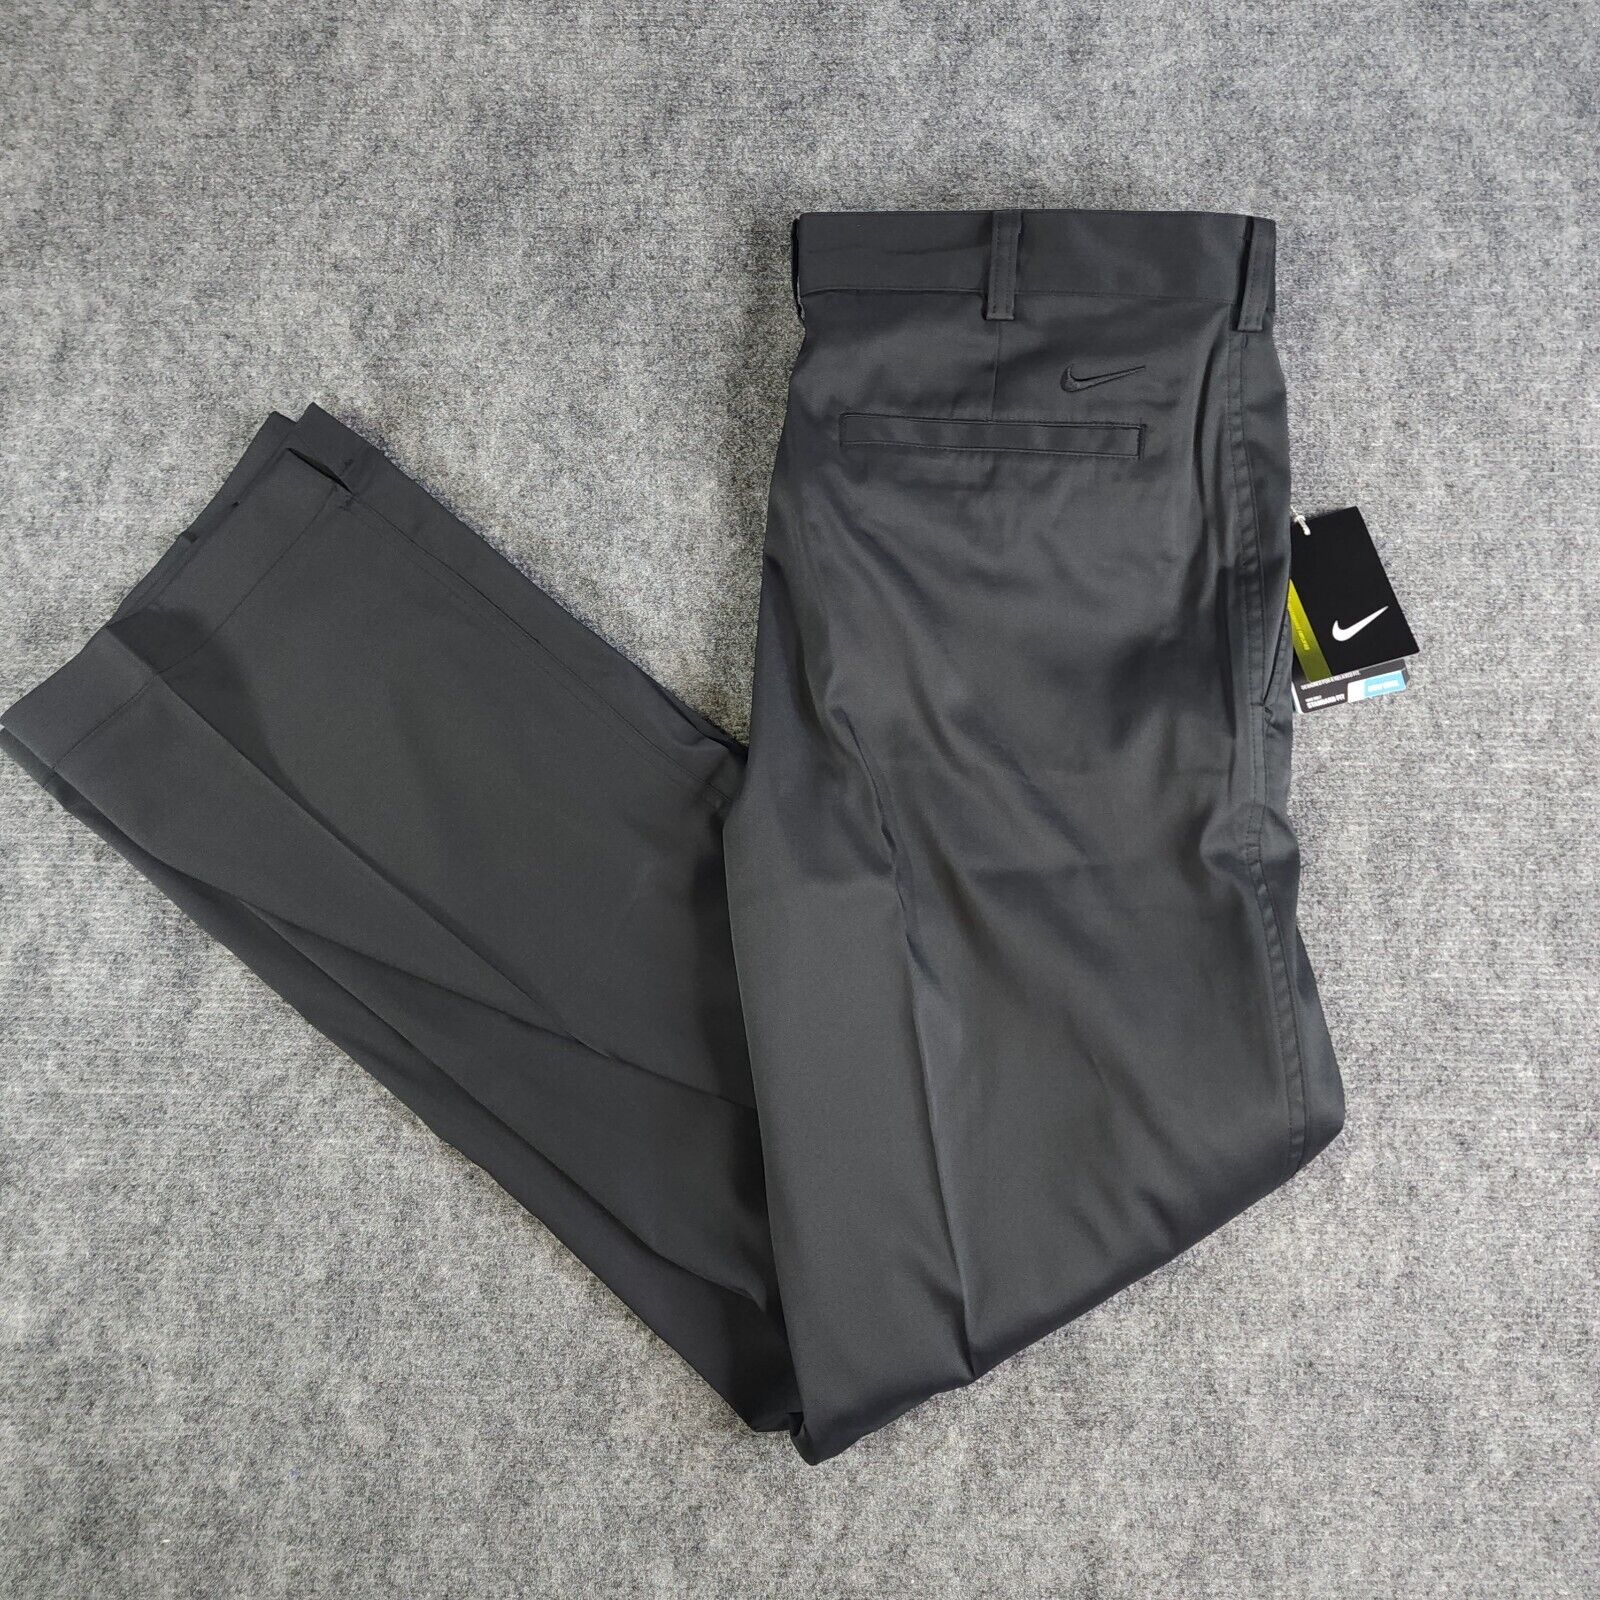 Nike Golf Pants 32x32 Standard Fit Dry Fit Gray Solid Performance Stretch 472532